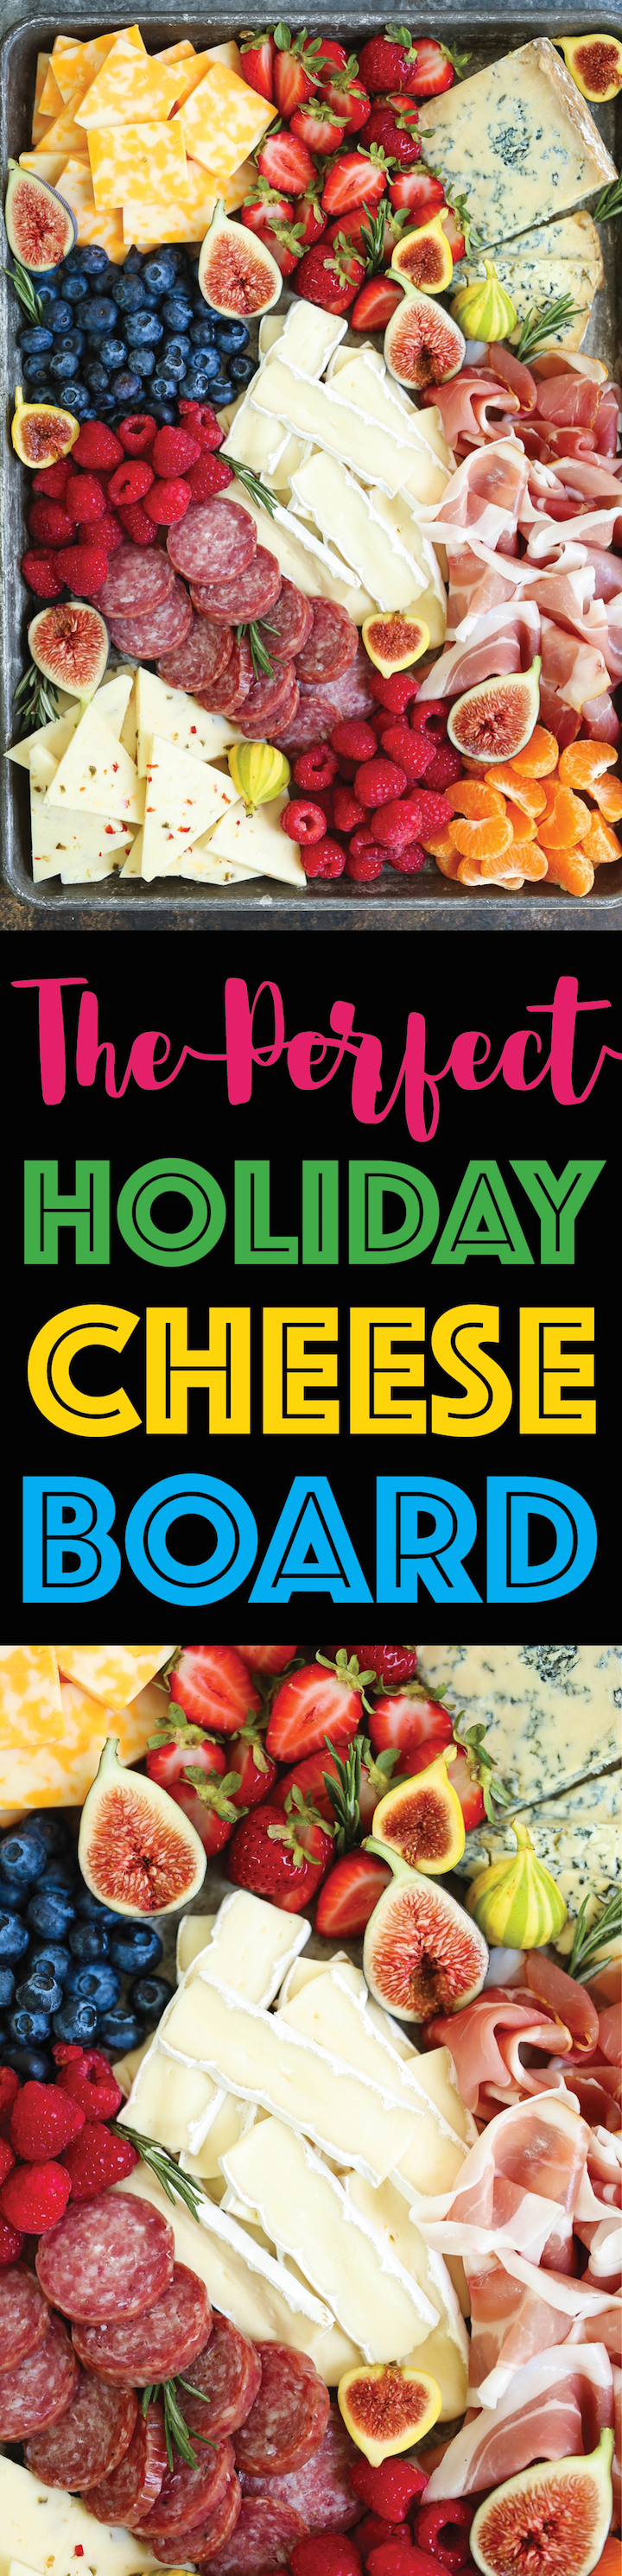 The Perfect Holiday Cheese Board - Learn how to assemble the most beautiful cheese and charcuterie board ever for a crowd! Only 10 min prep. So easy, right?